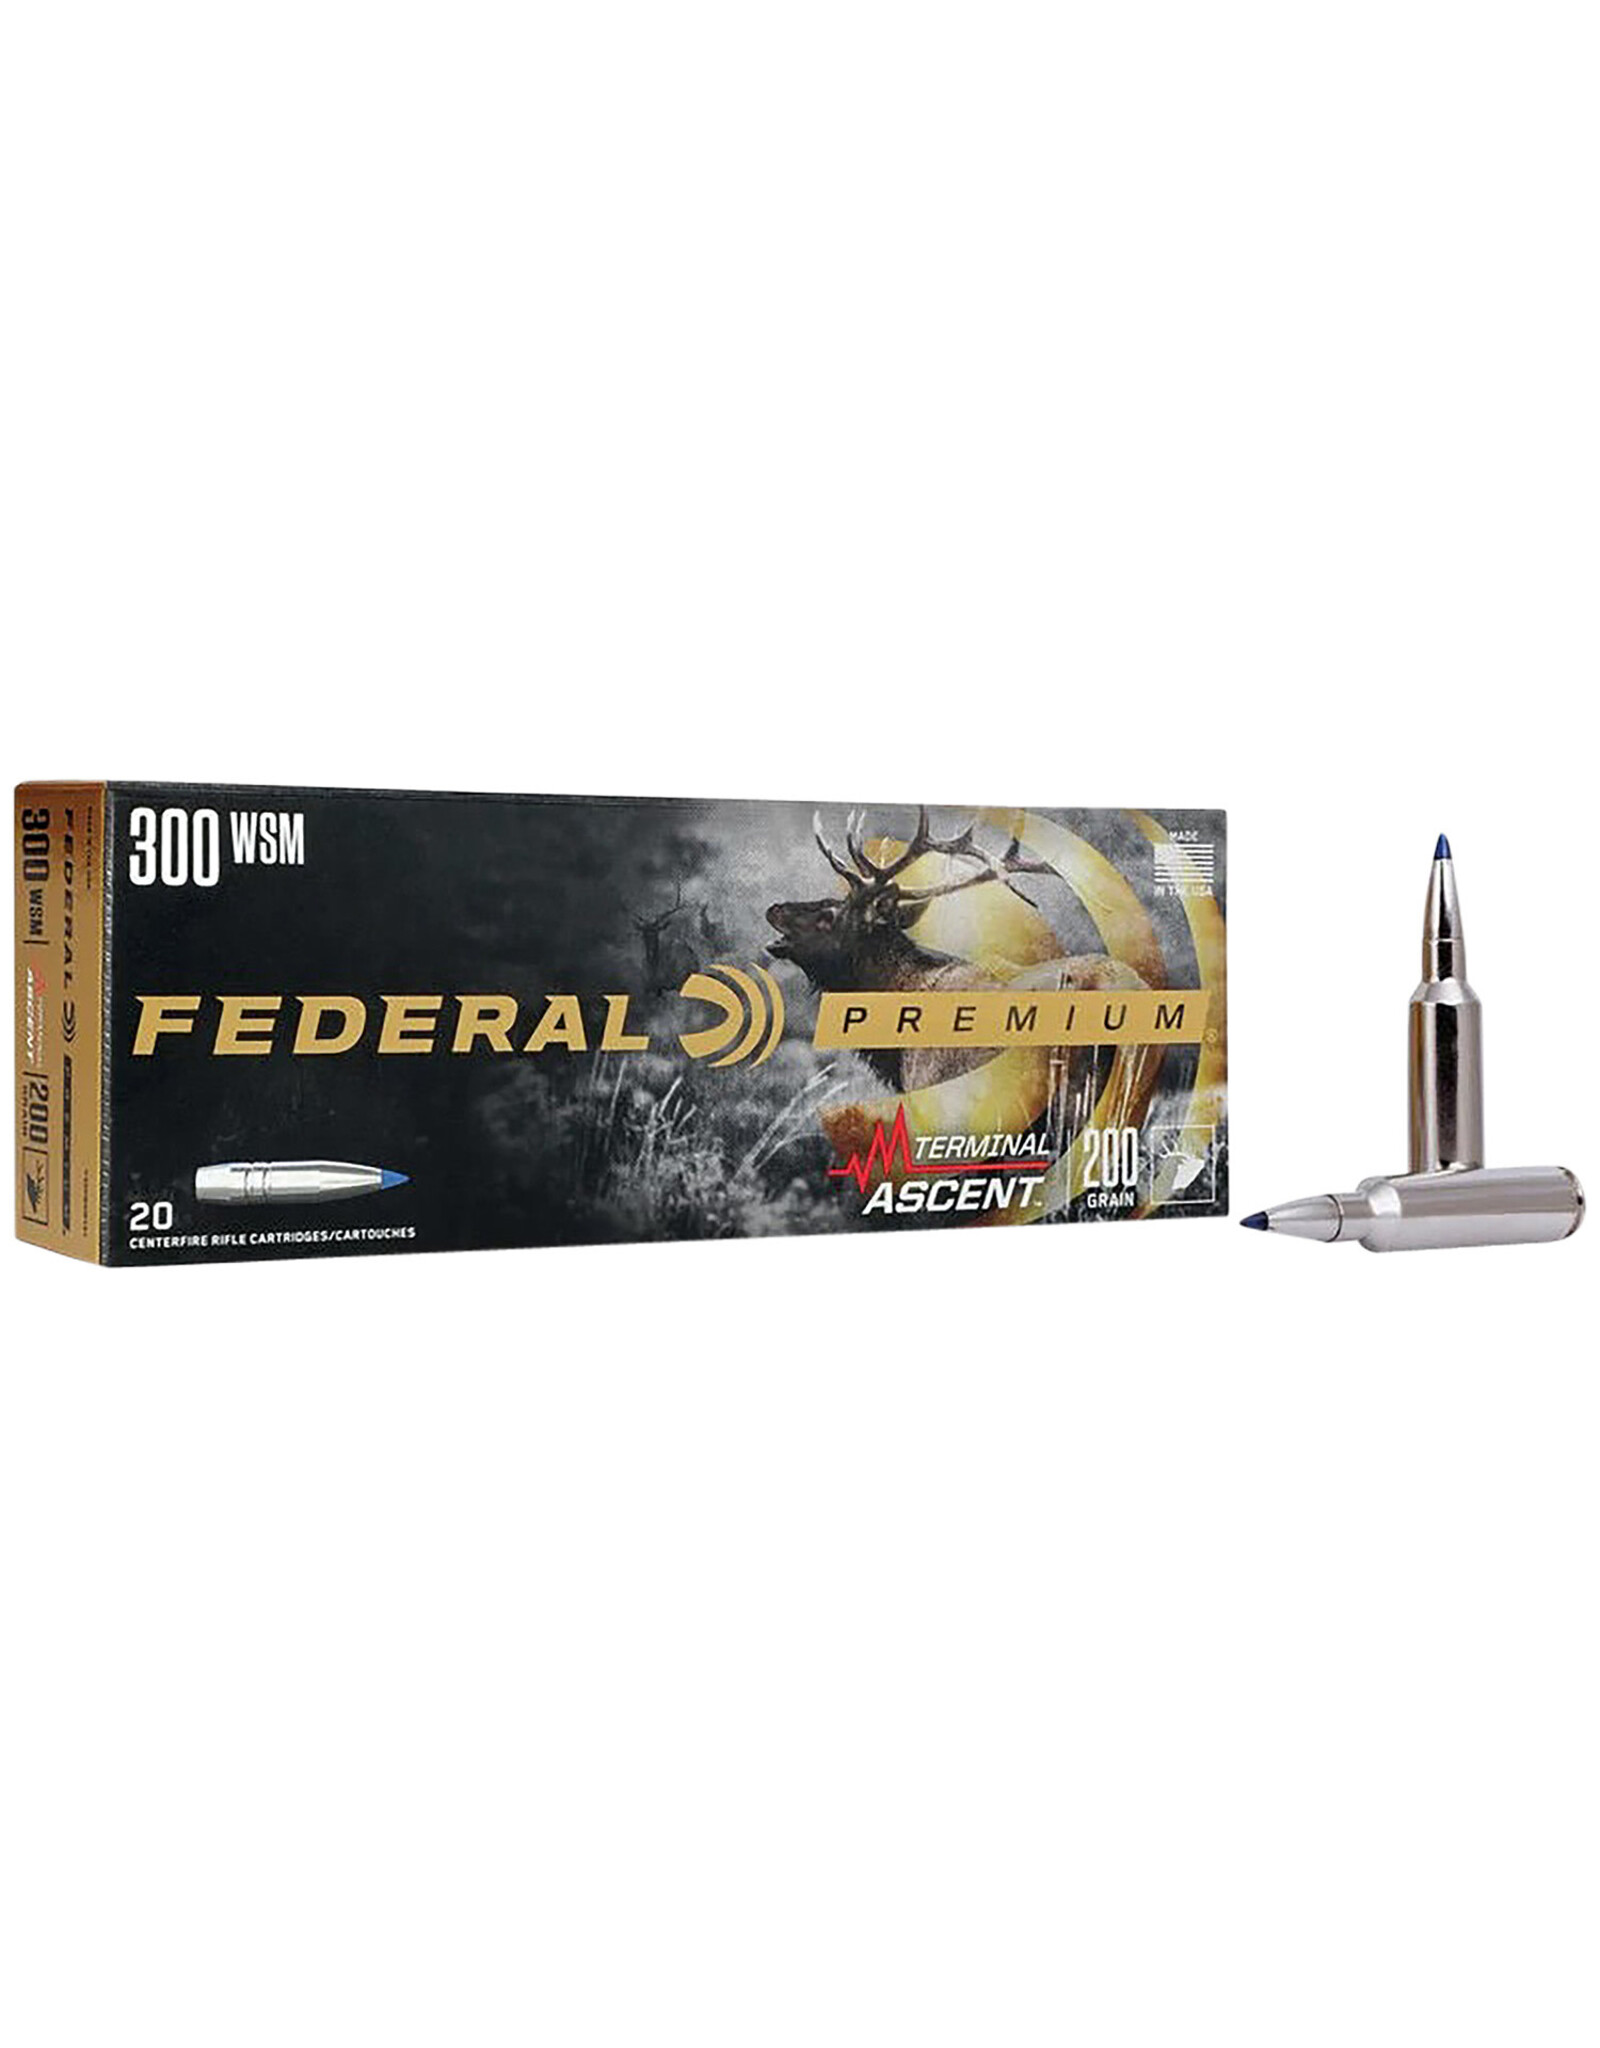 Federal Terminal Ascent .300 WSM 200 Gr - 20 Count